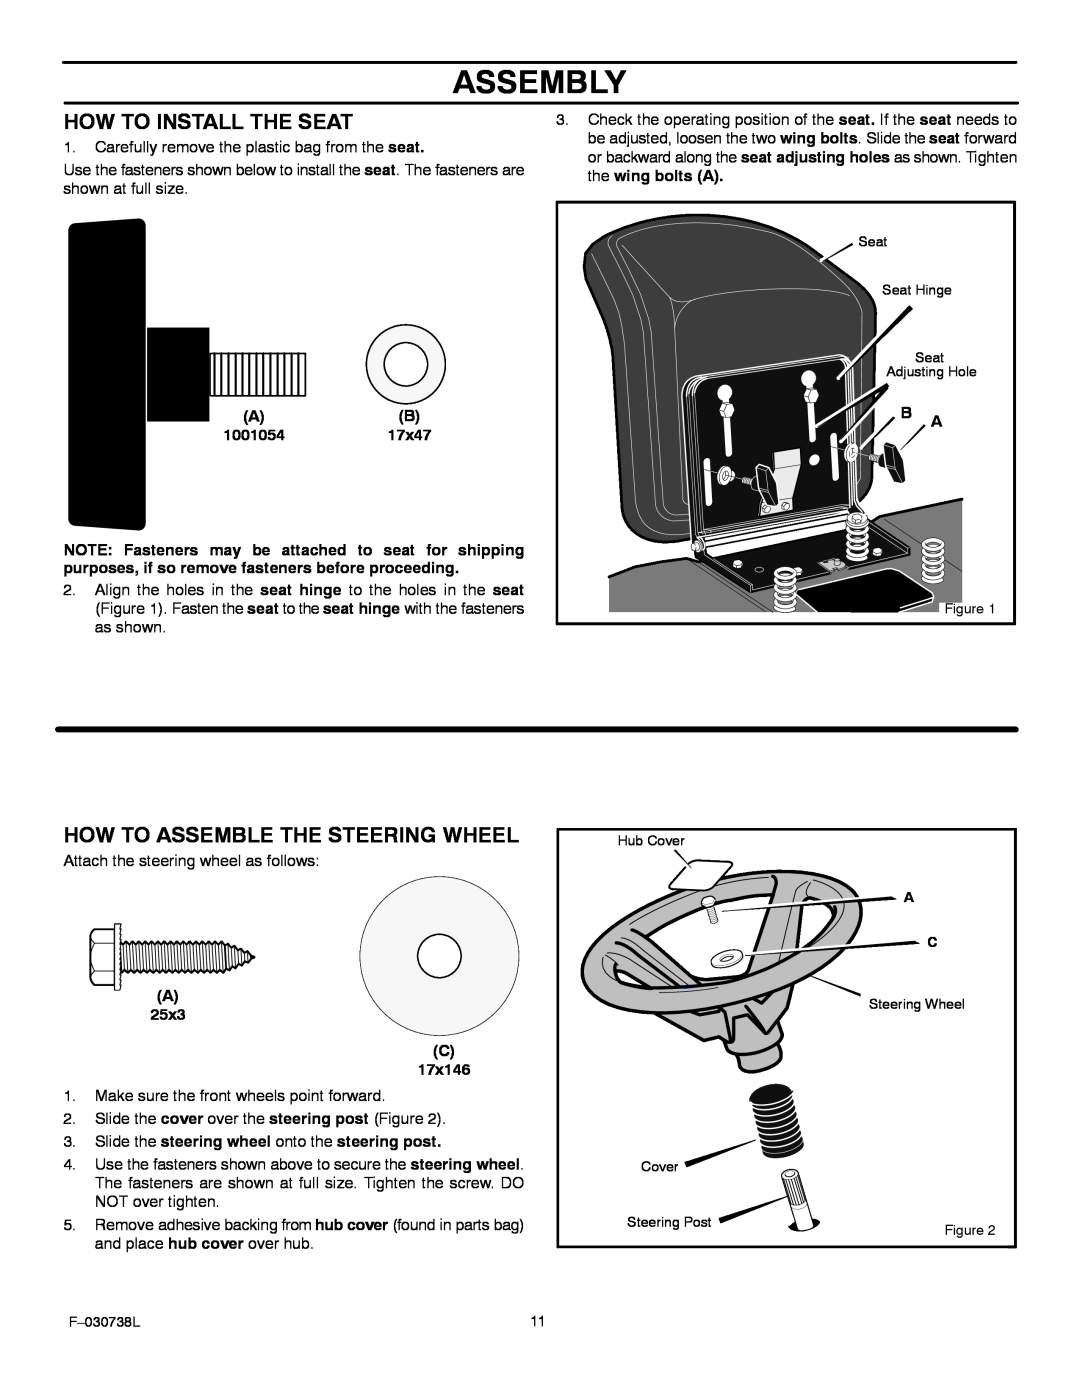 Murray 425603x99A manual Assembly, How To Install The Seat, How To Assemble The Steering Wheel, Ab, A 25x3 C 